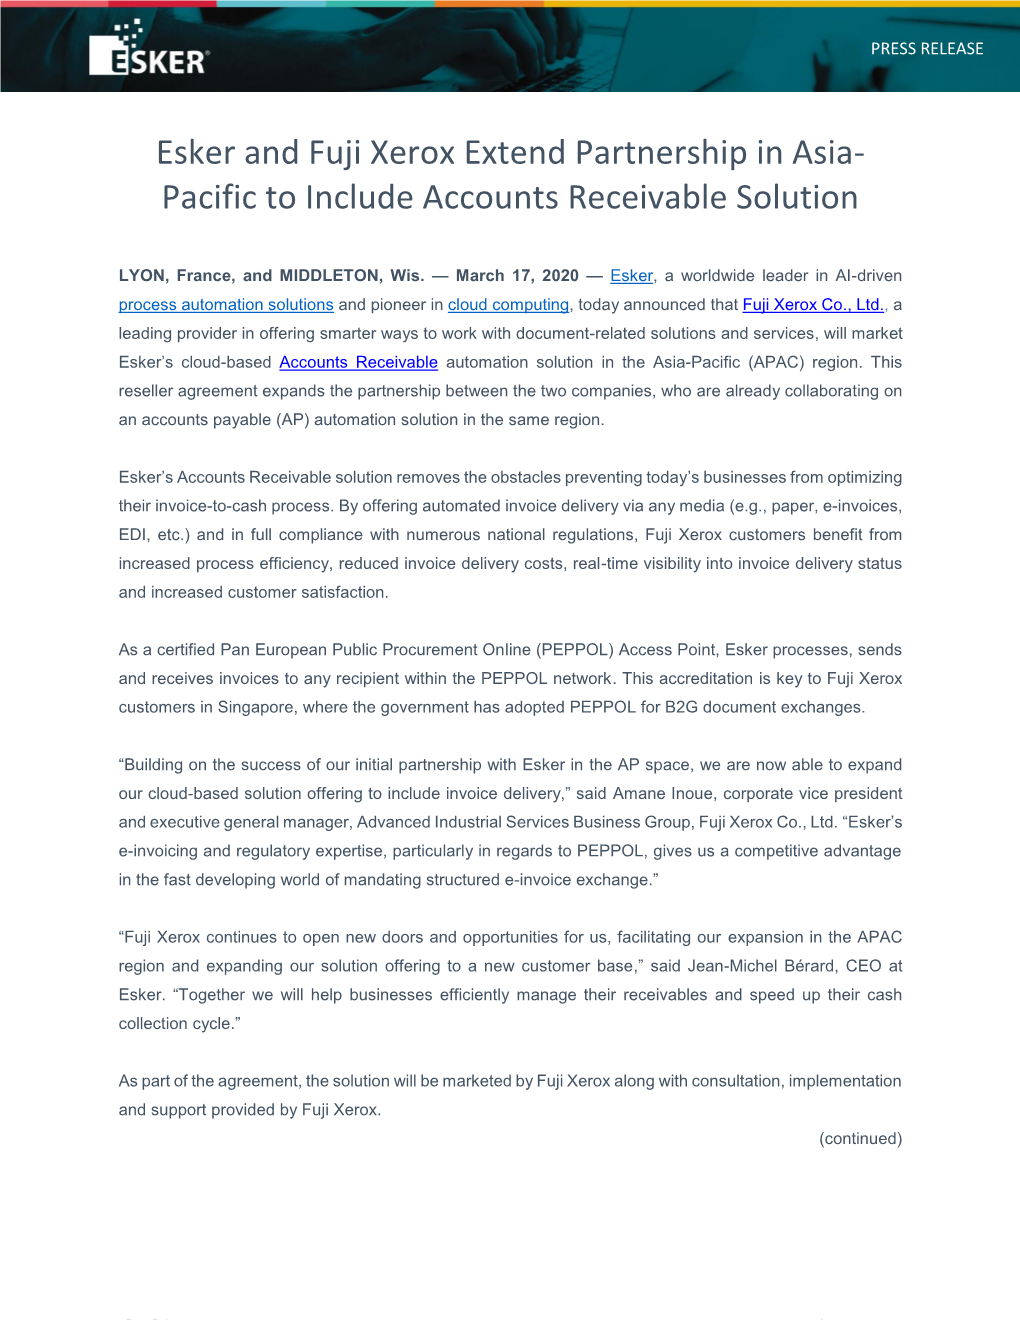 Esker and Fuji Xerox Extend Partnership in Asia- Pacific to Include Accounts Receivable Solution